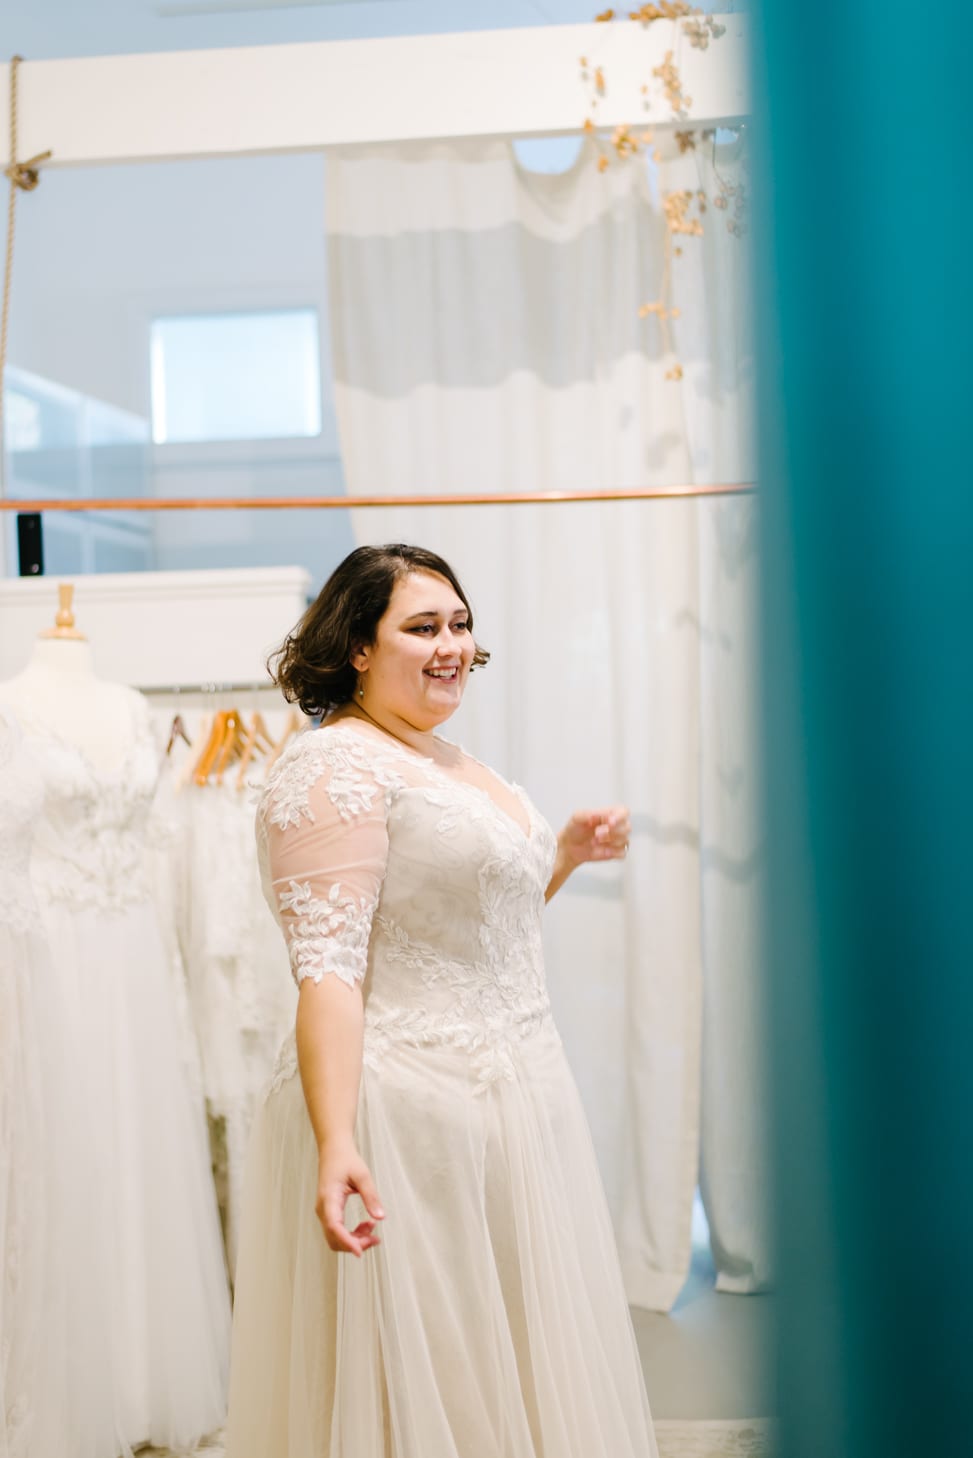 plus size woman in wedding dress smiling at herself in the mirror at Lace and Liberty